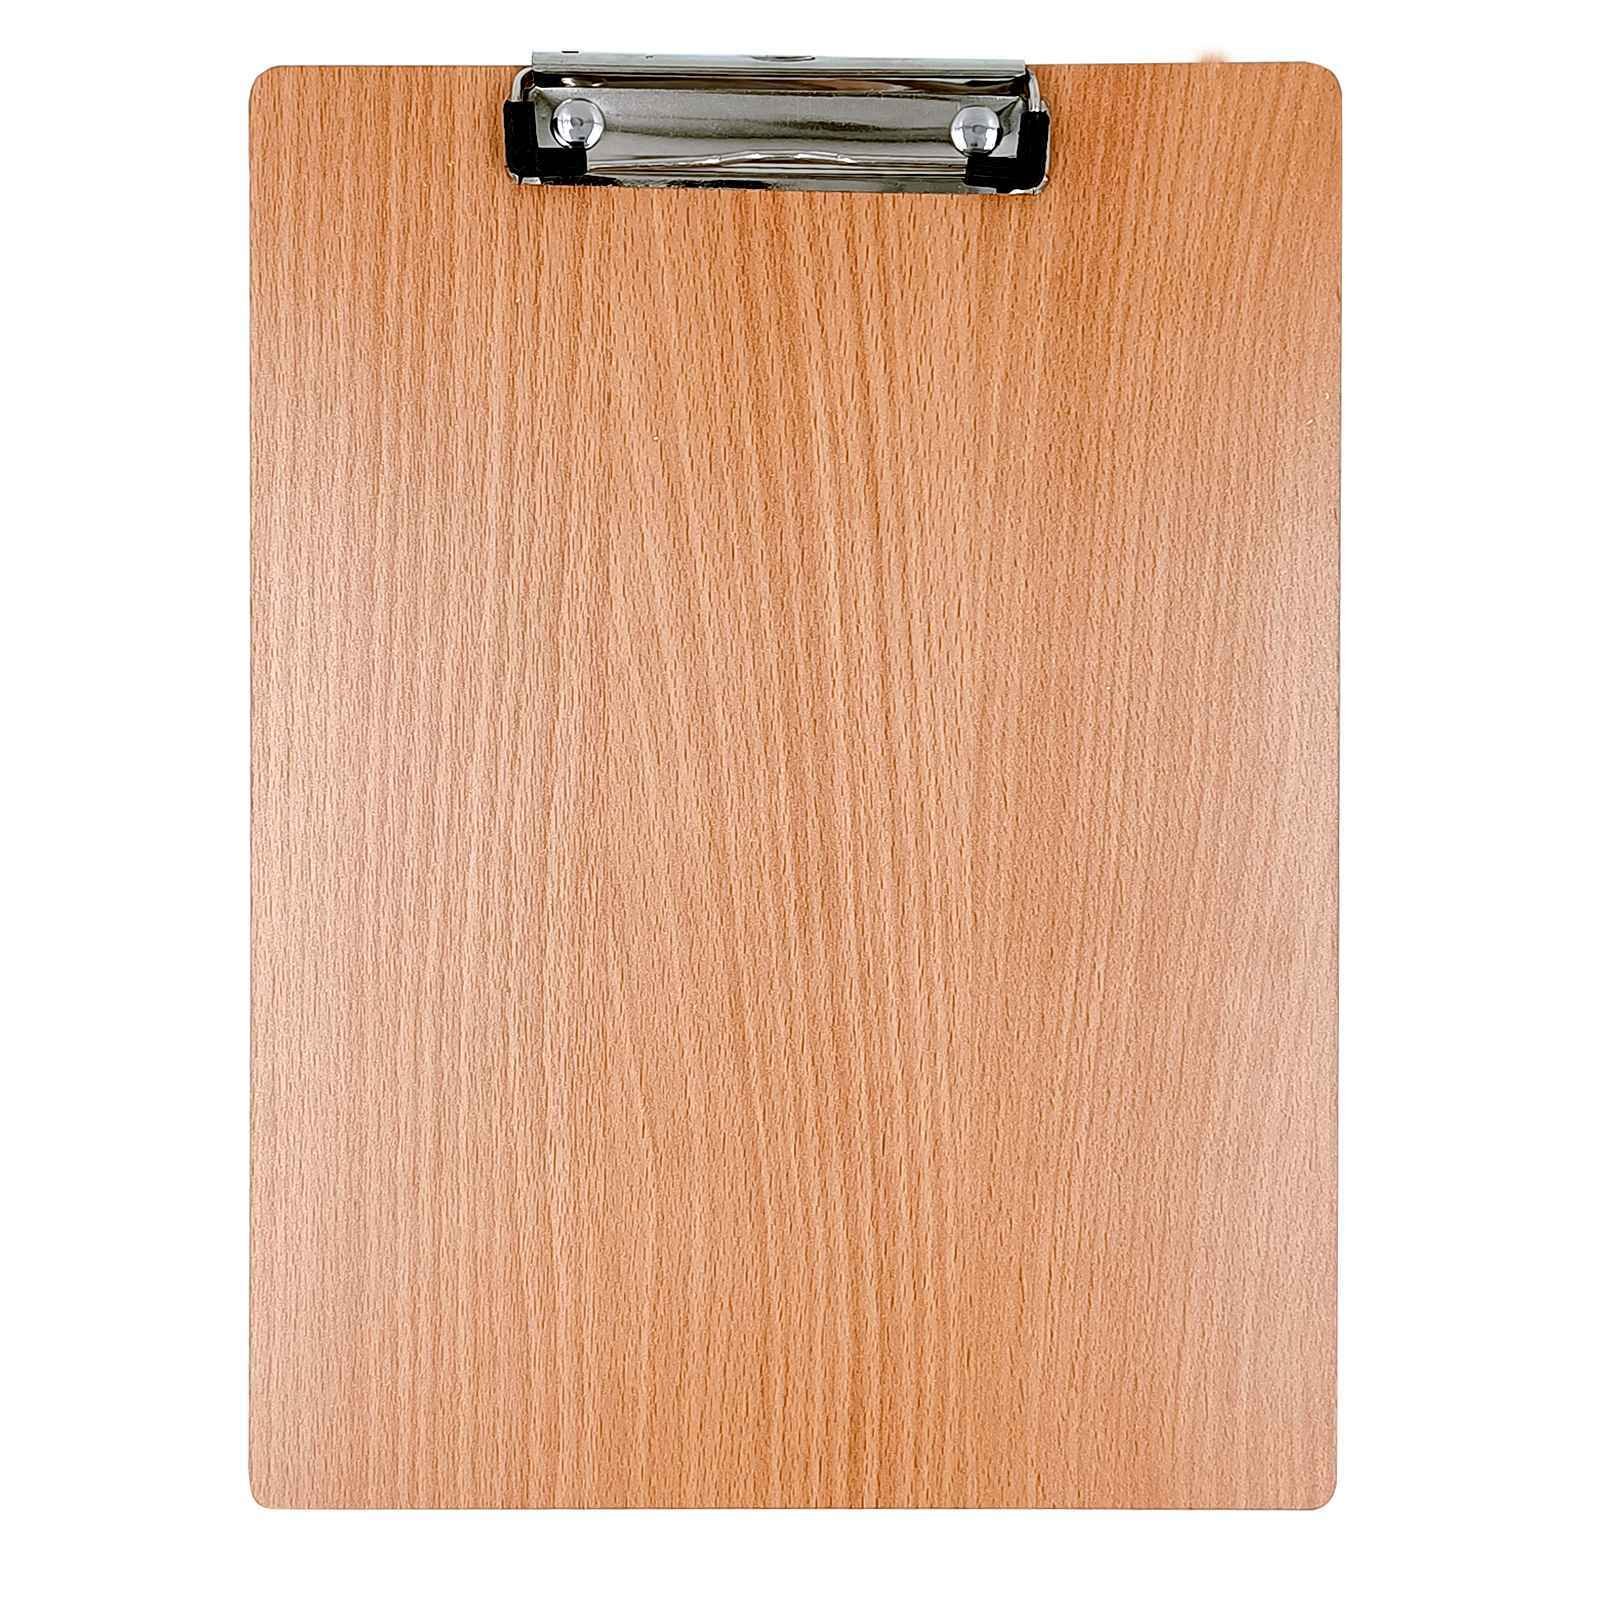 Examination pad / Board wooden front view